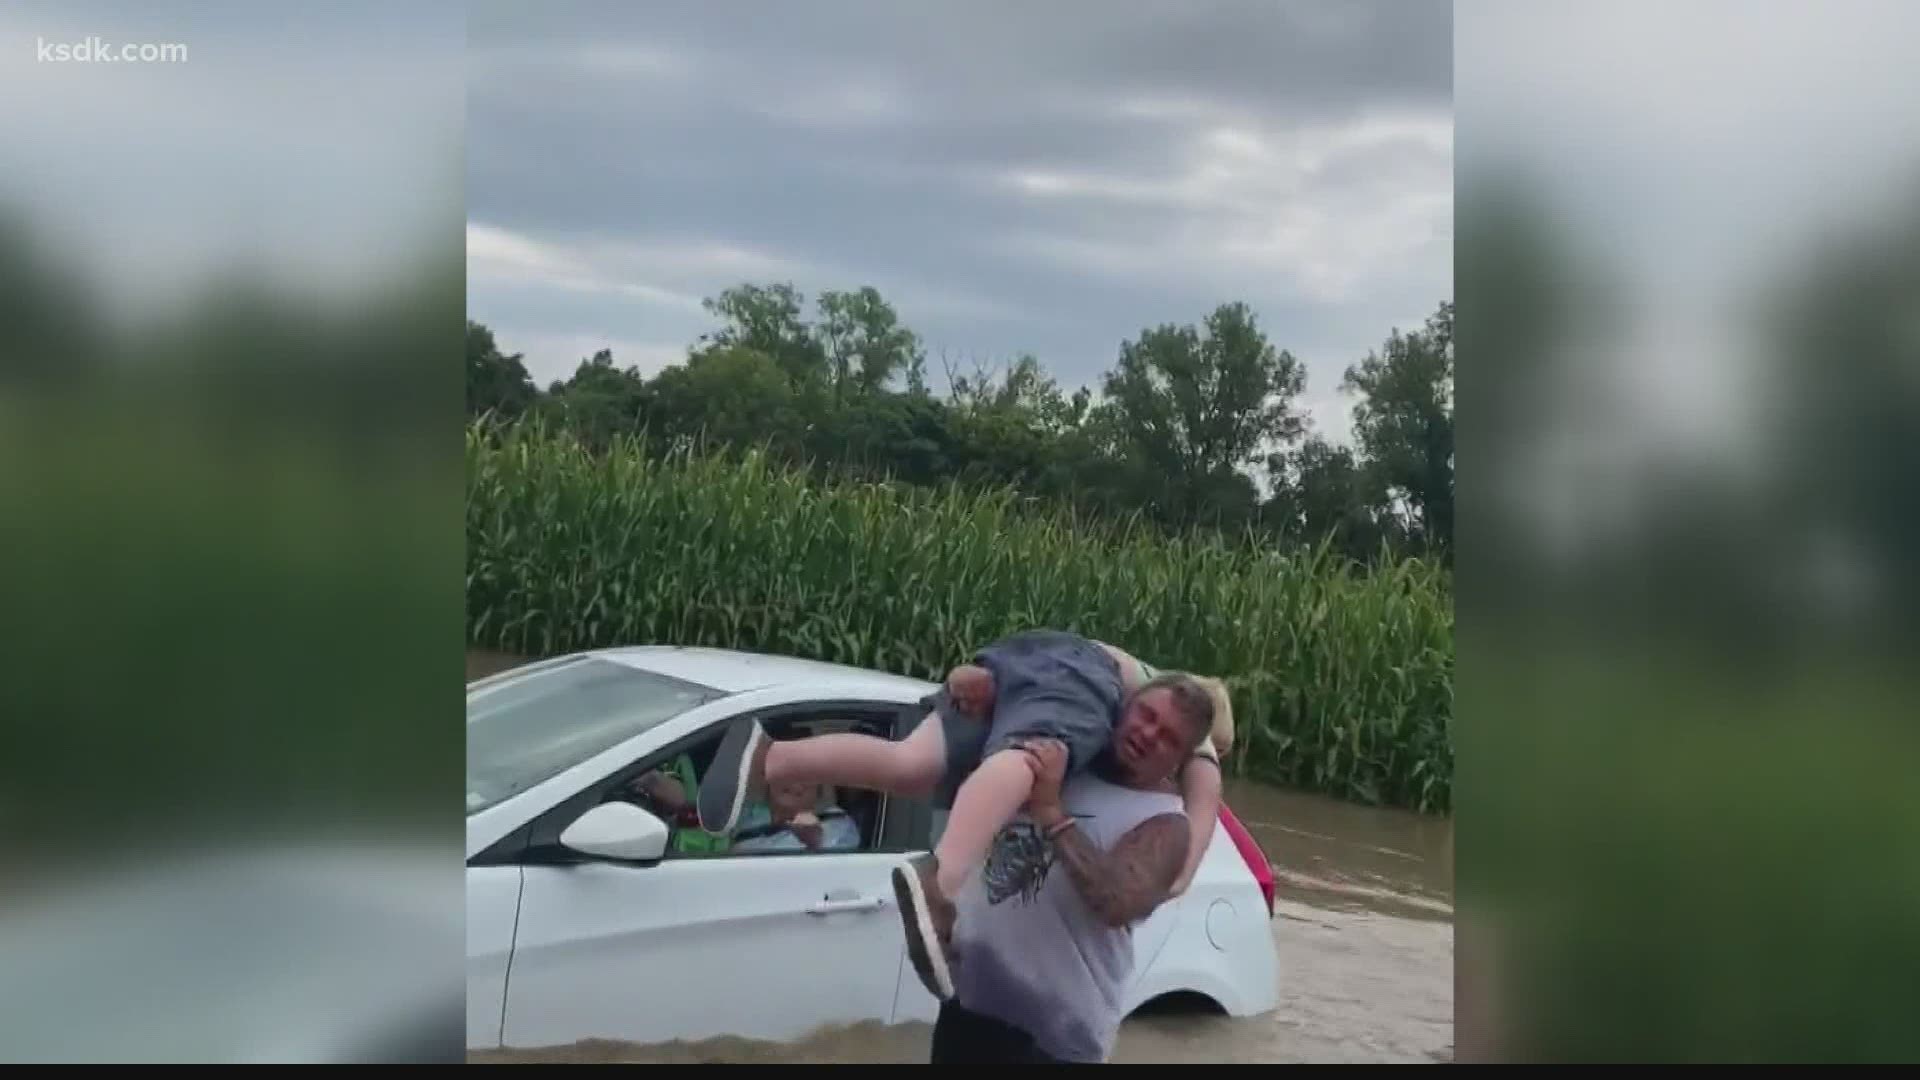 The three got stuck in flash flood waters on Sunday along Highway 162